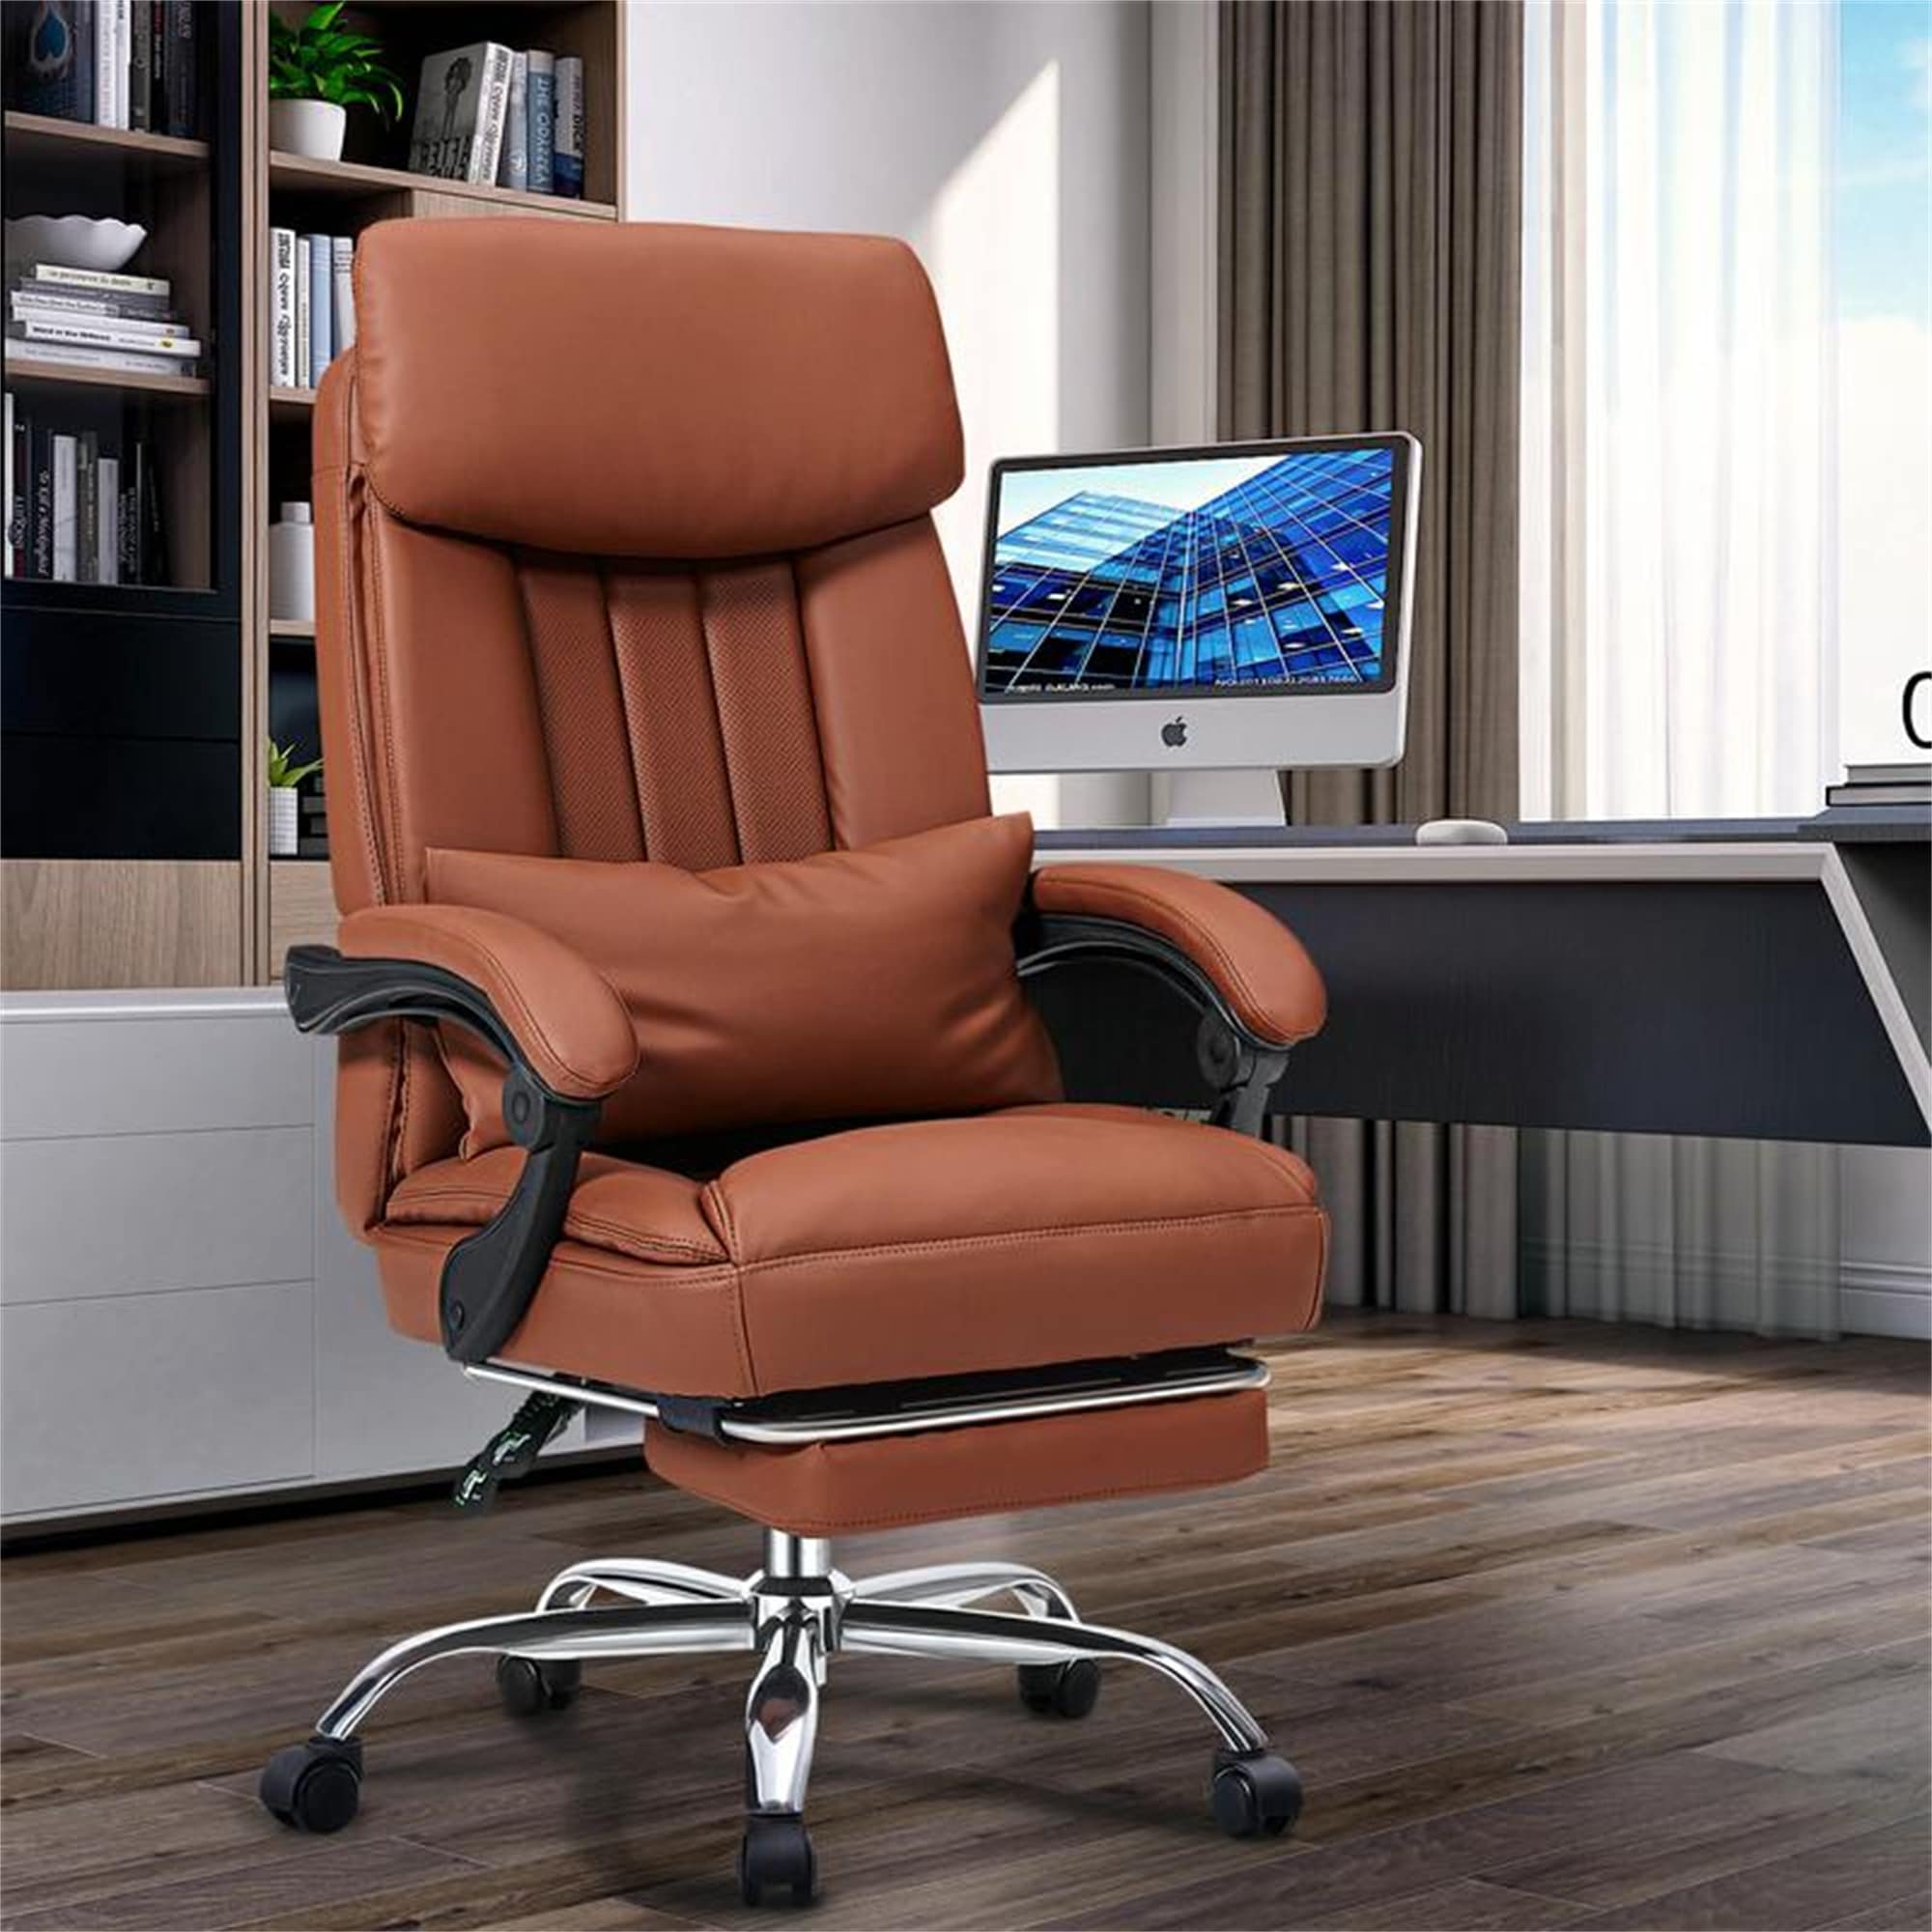 https://ak1.ostkcdn.com/images/products/is/images/direct/48810091a2f85252ef21693dc54bec819272b038/Executive-Chair%2C-High-Back-Leather-Desk-Chair-W--Retractable-Footrest.jpg